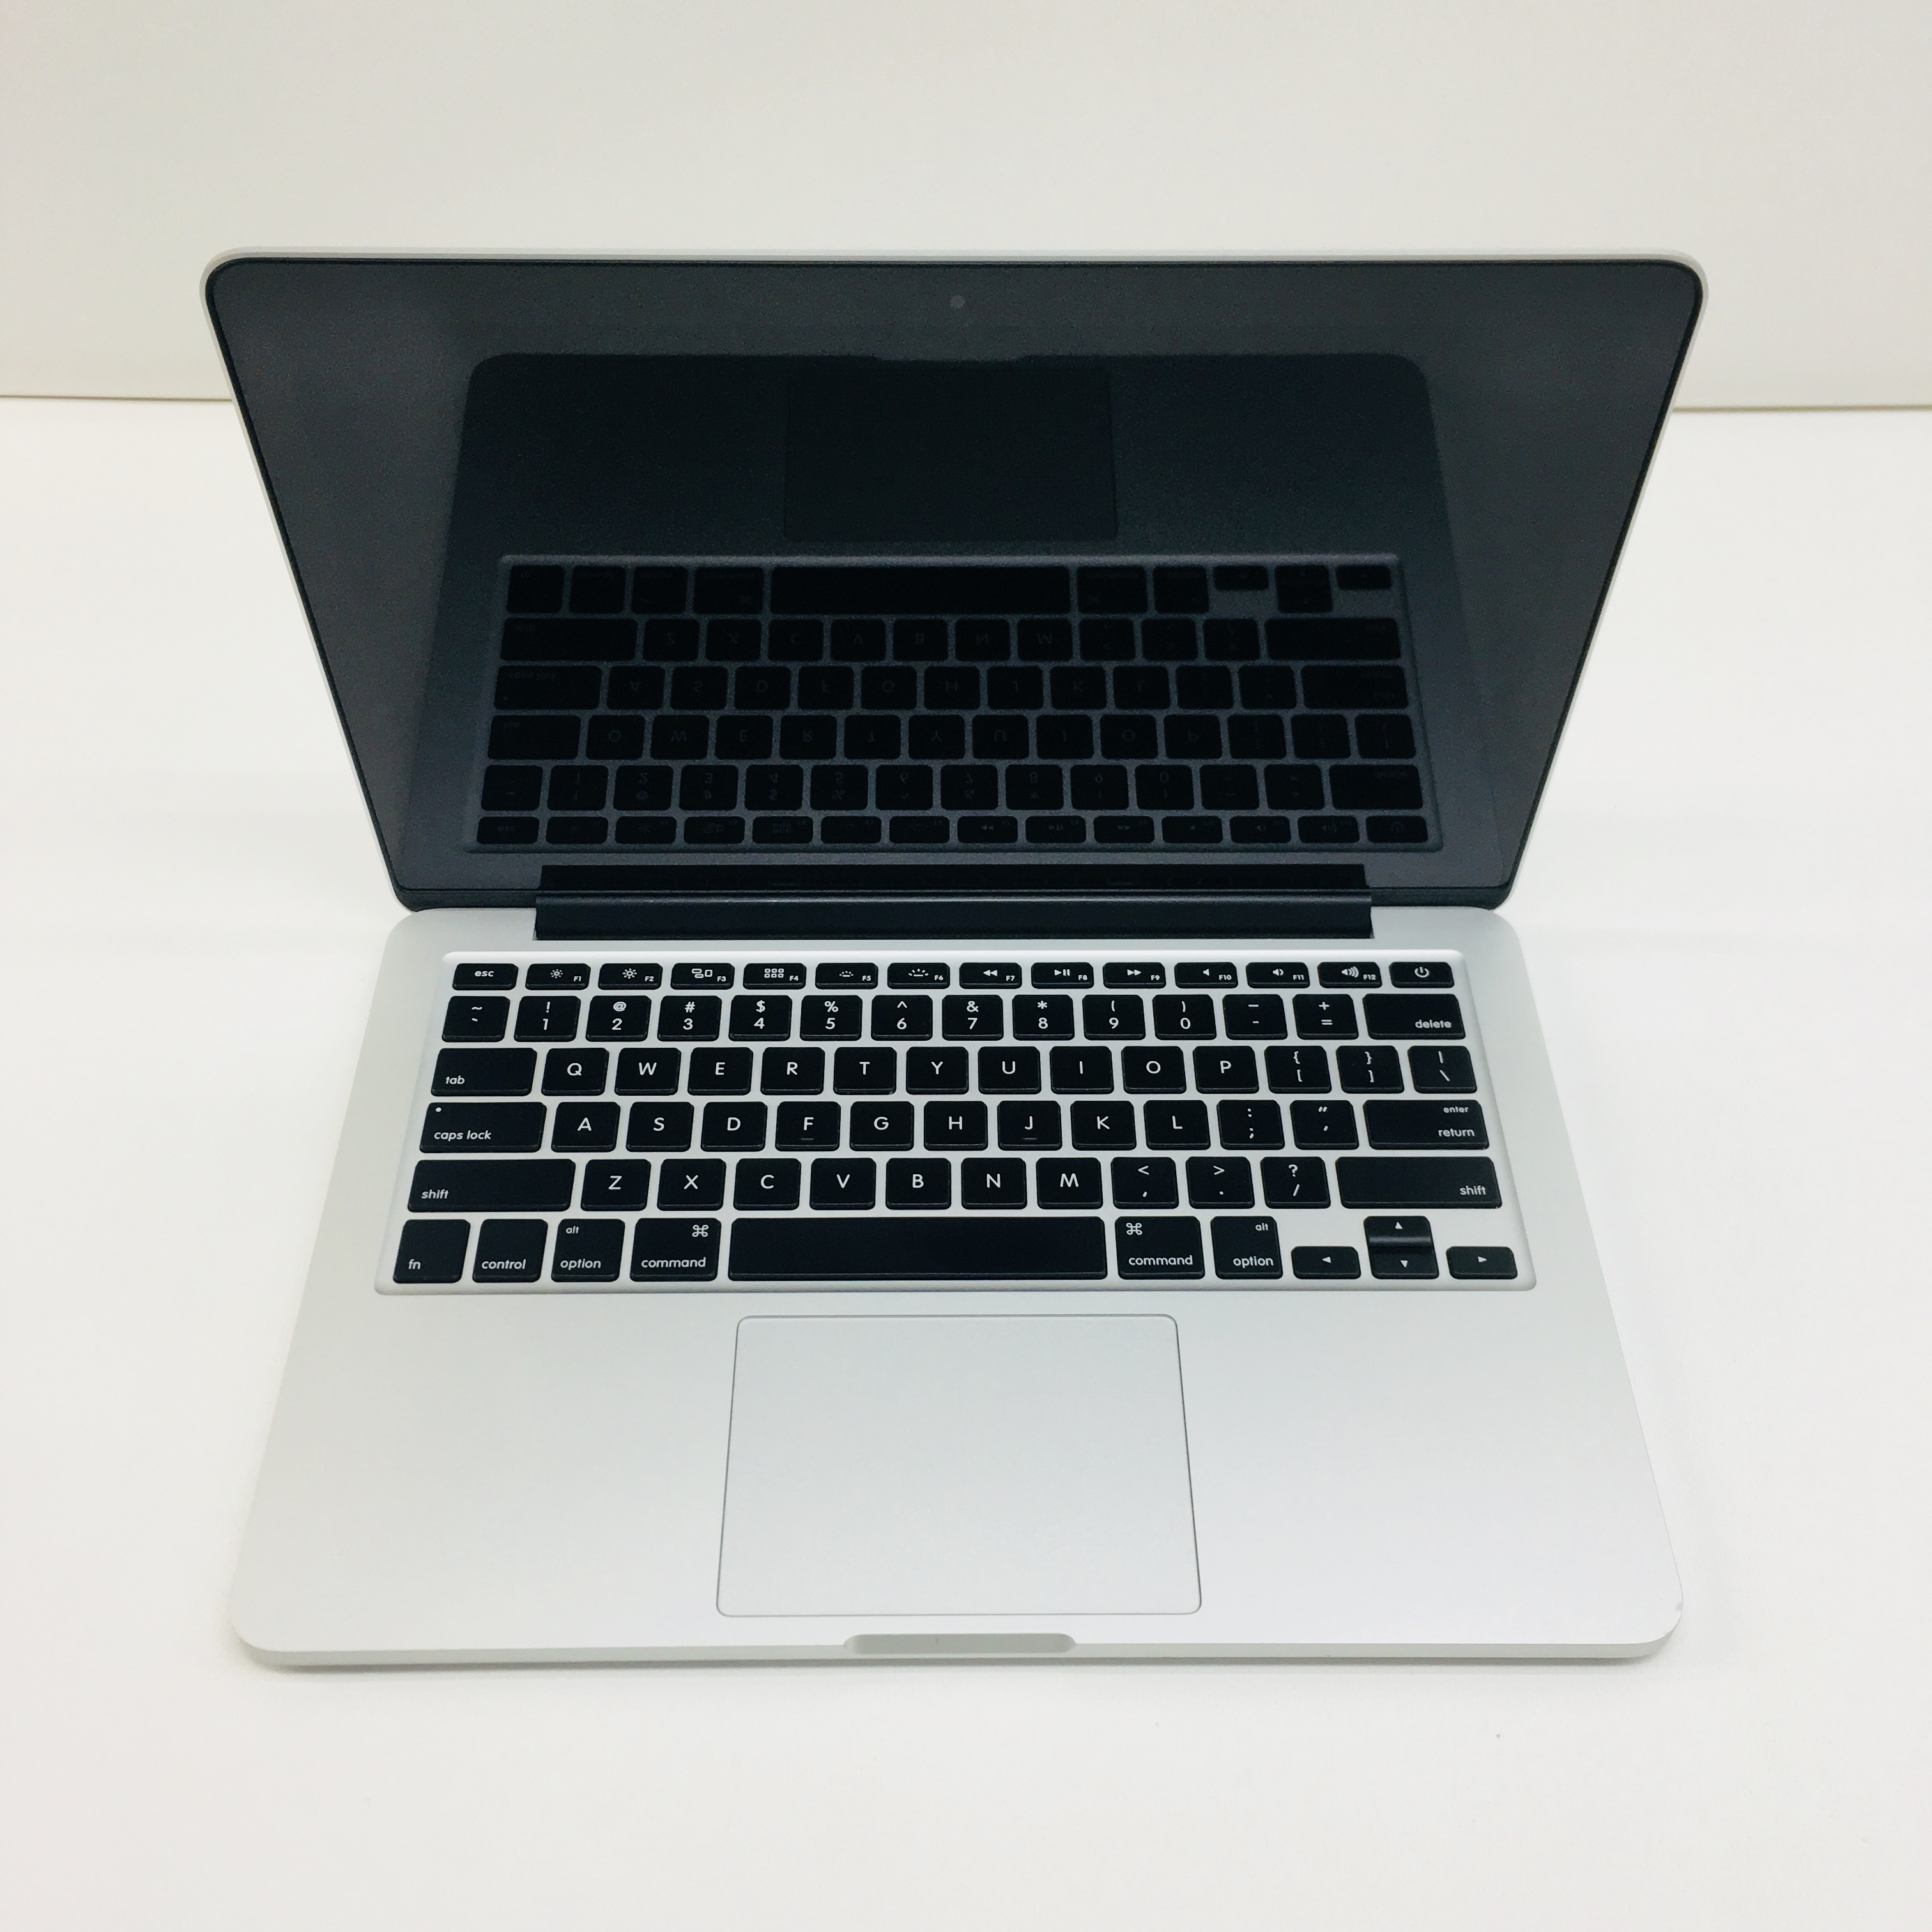 macbook pro retina 2015 getting extremely hot for no reason